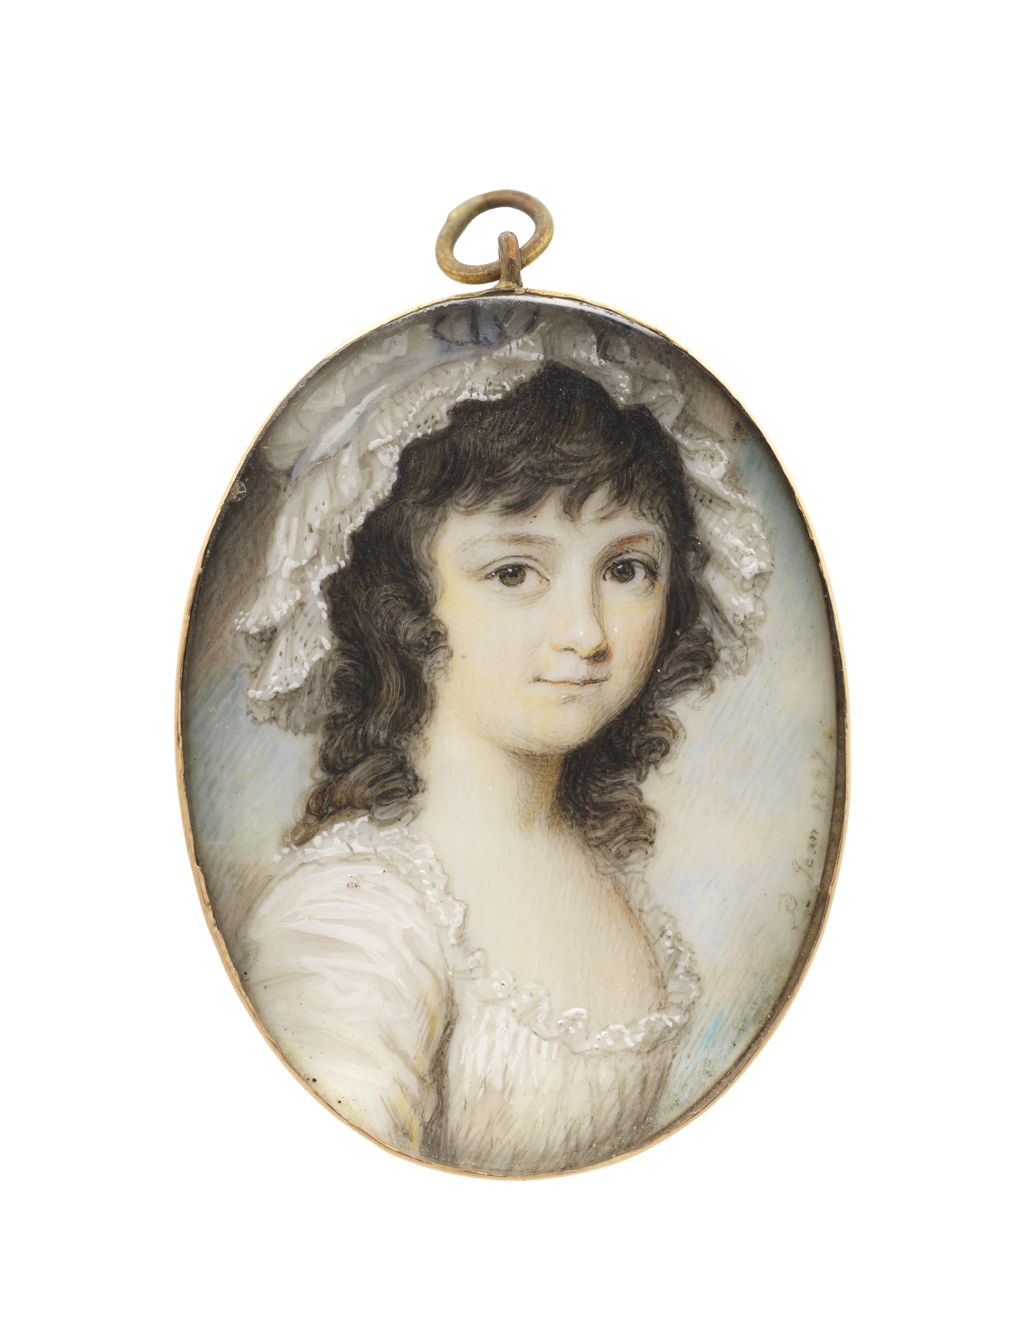 Portrait miniature of a light-skinned girl with unpowdered hair wearing a white gown before a sky background.